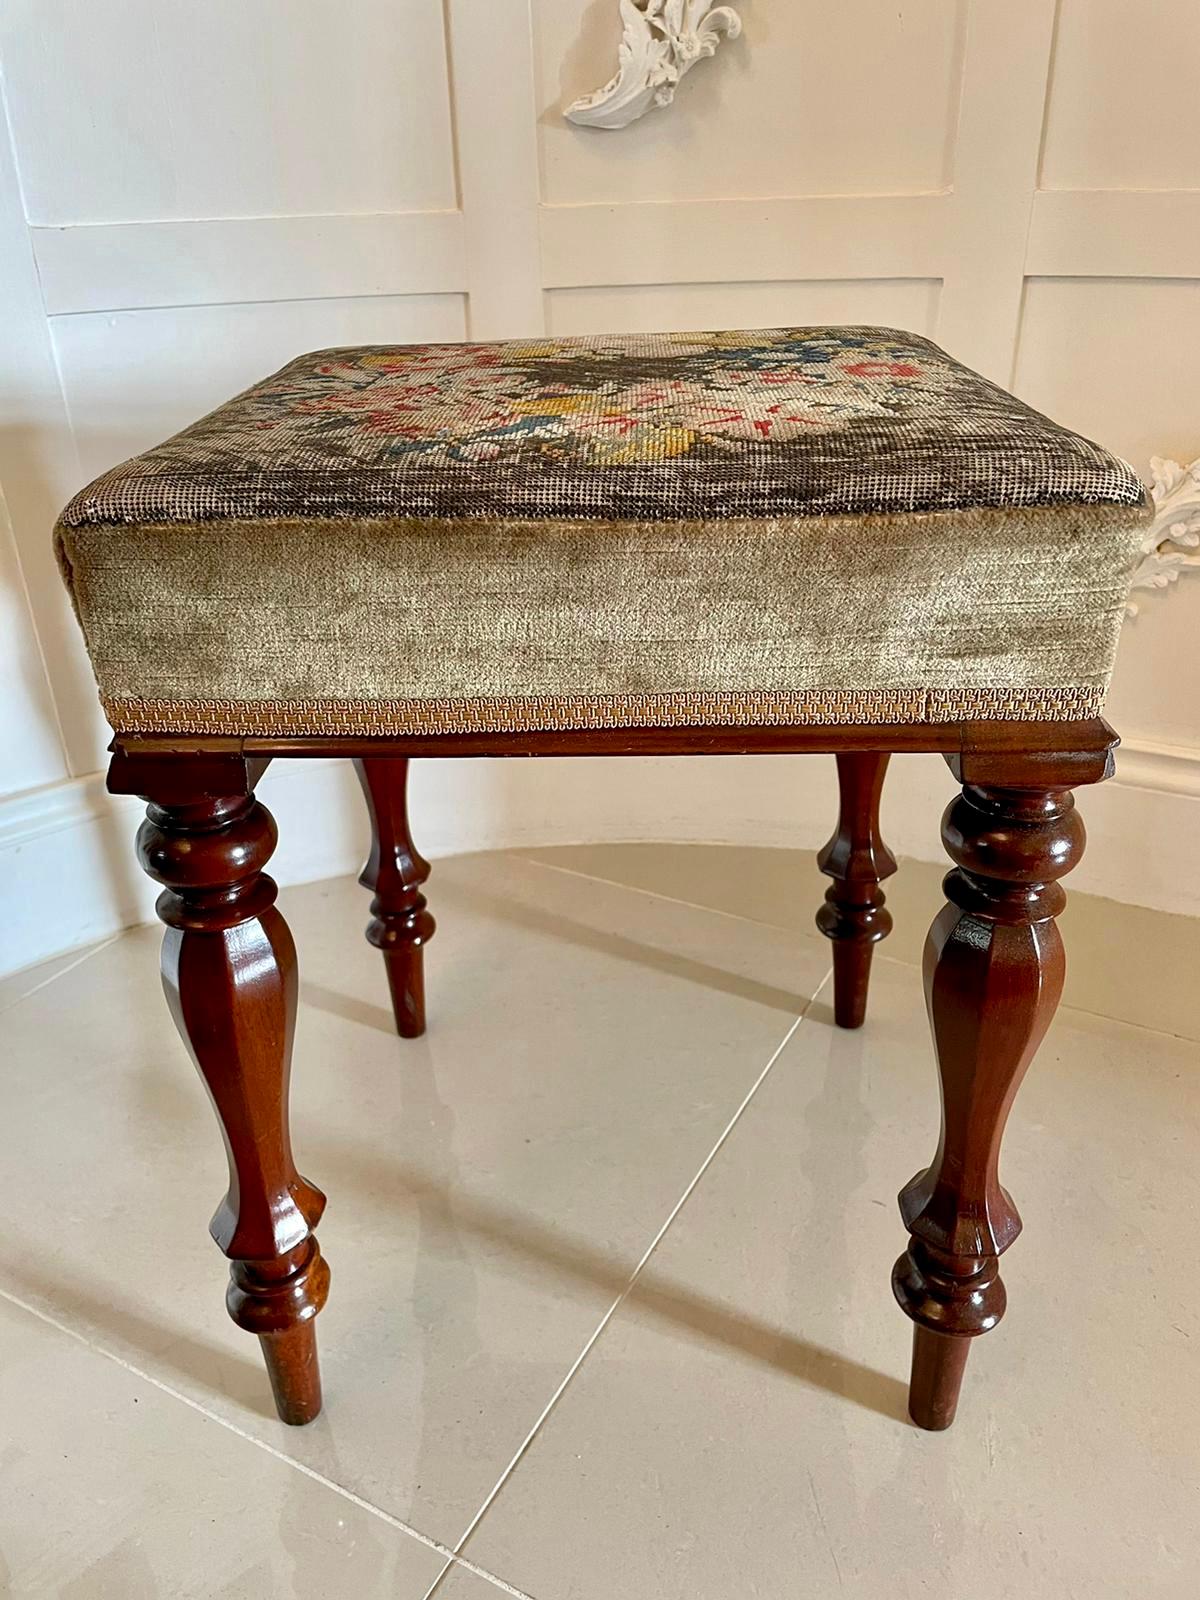 Antique William IV mahogany stool having a pretty mahogany freize and standing on beautiful octagonal turned and shaped tapering legs.

In lovely original condition covered in a flowered tapestry.

We are able to offer a re-upholstery service on